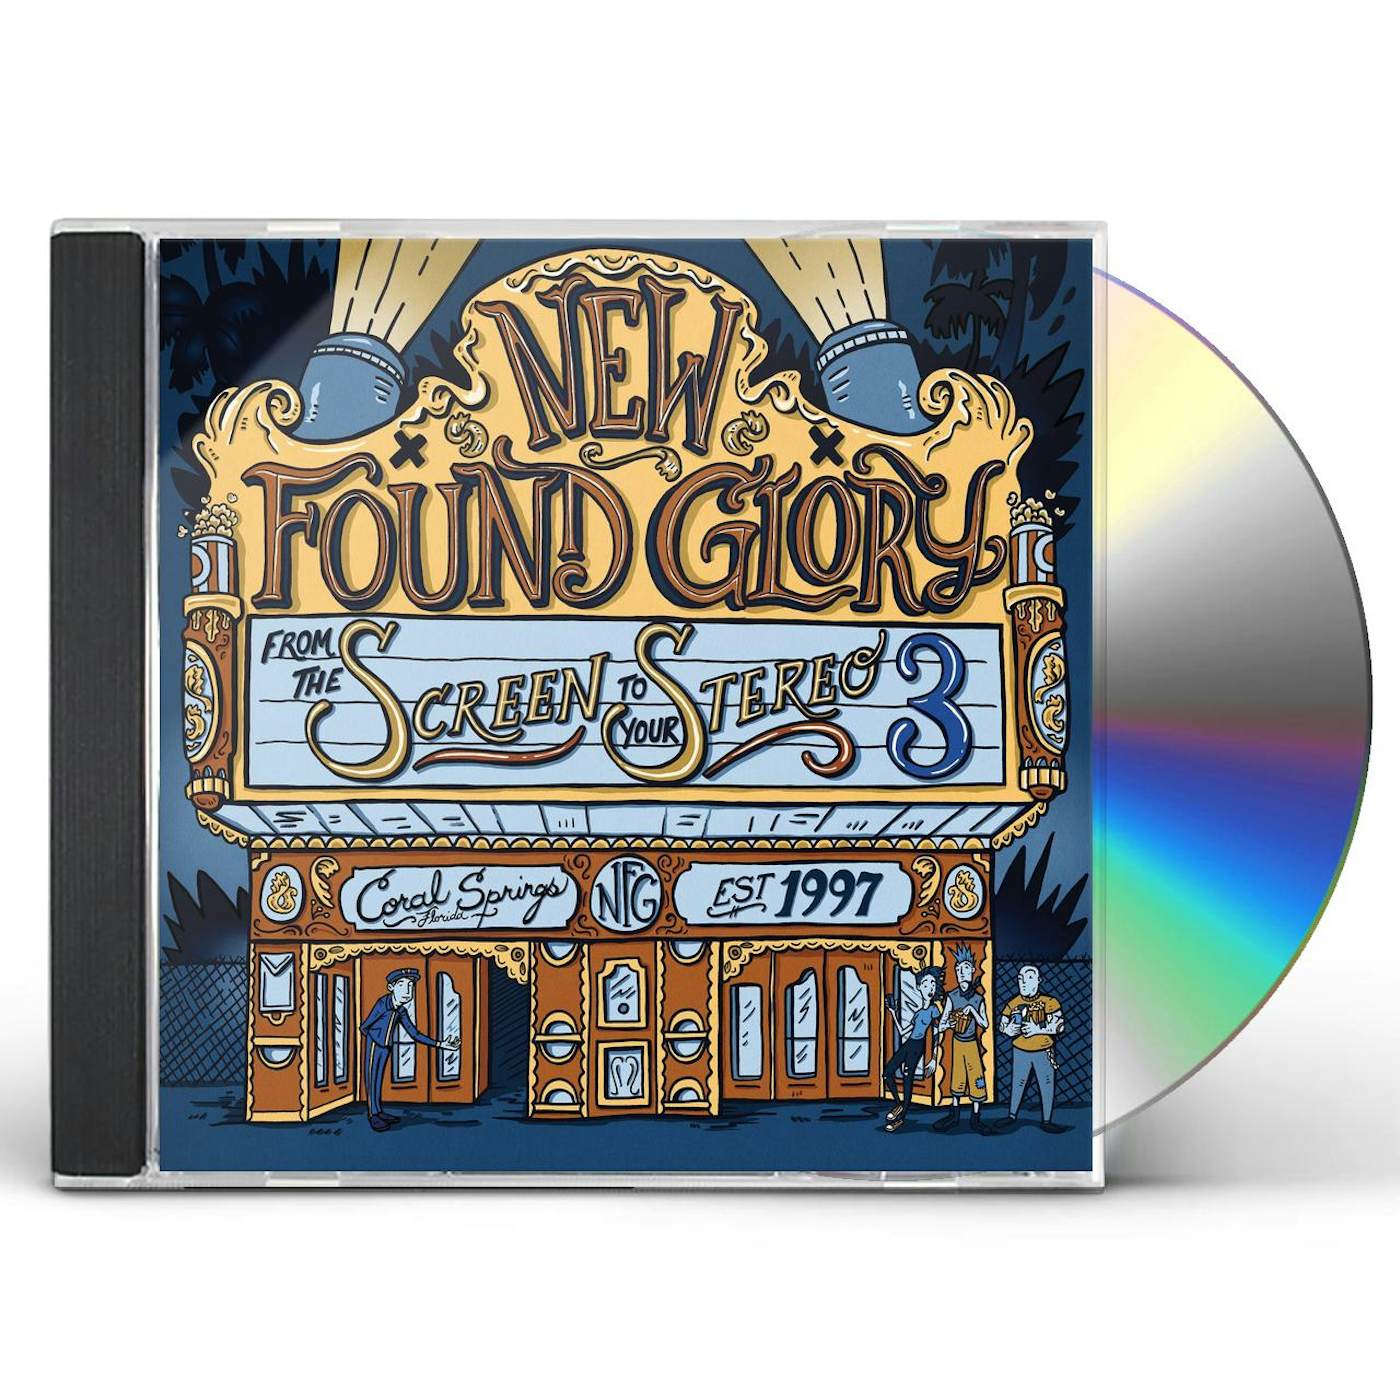 New Found Glory FROM THE SCREEN TO YOUR STEREO 3 CD